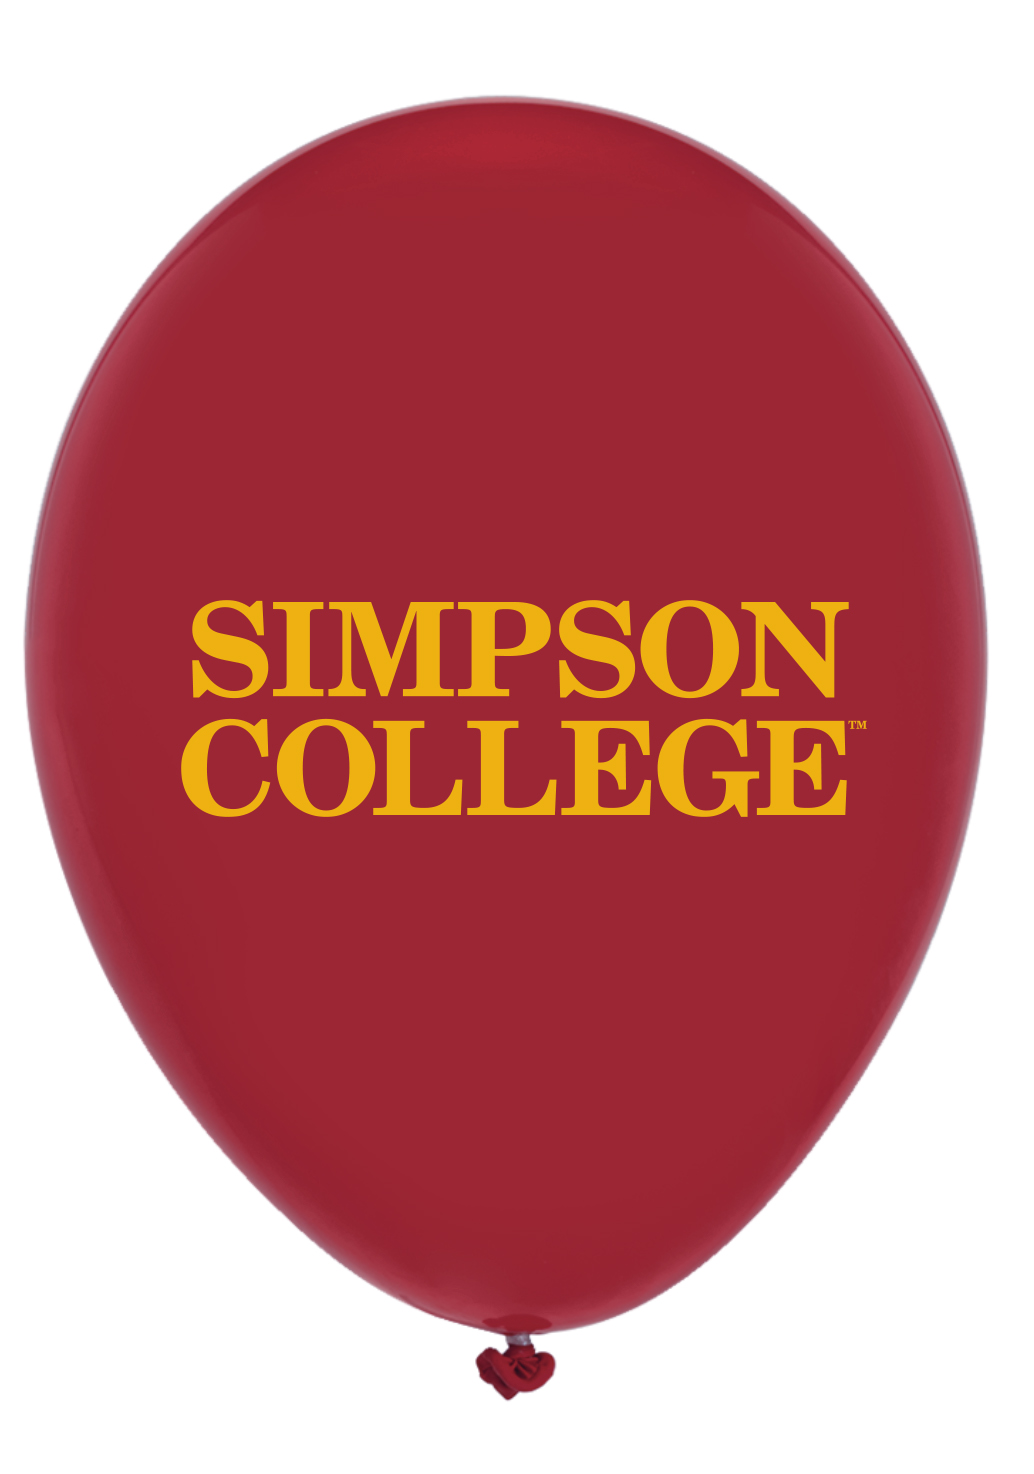 Simpson college red balloon with gold logo